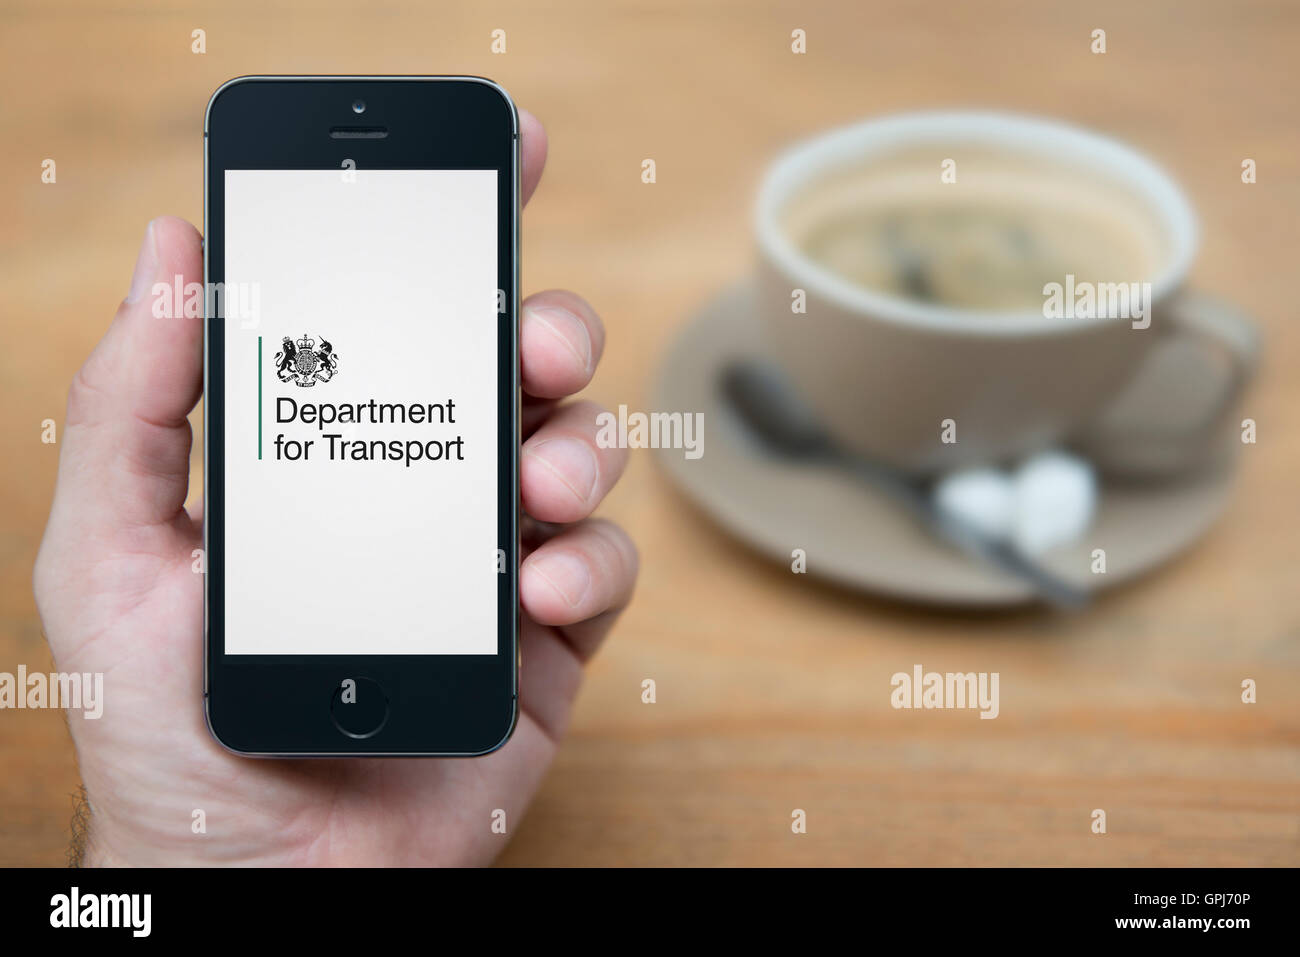 A man looks at his iPhone which displays the UK Government Department for Transport logo, with coffee (Editorial use only). Stock Photo